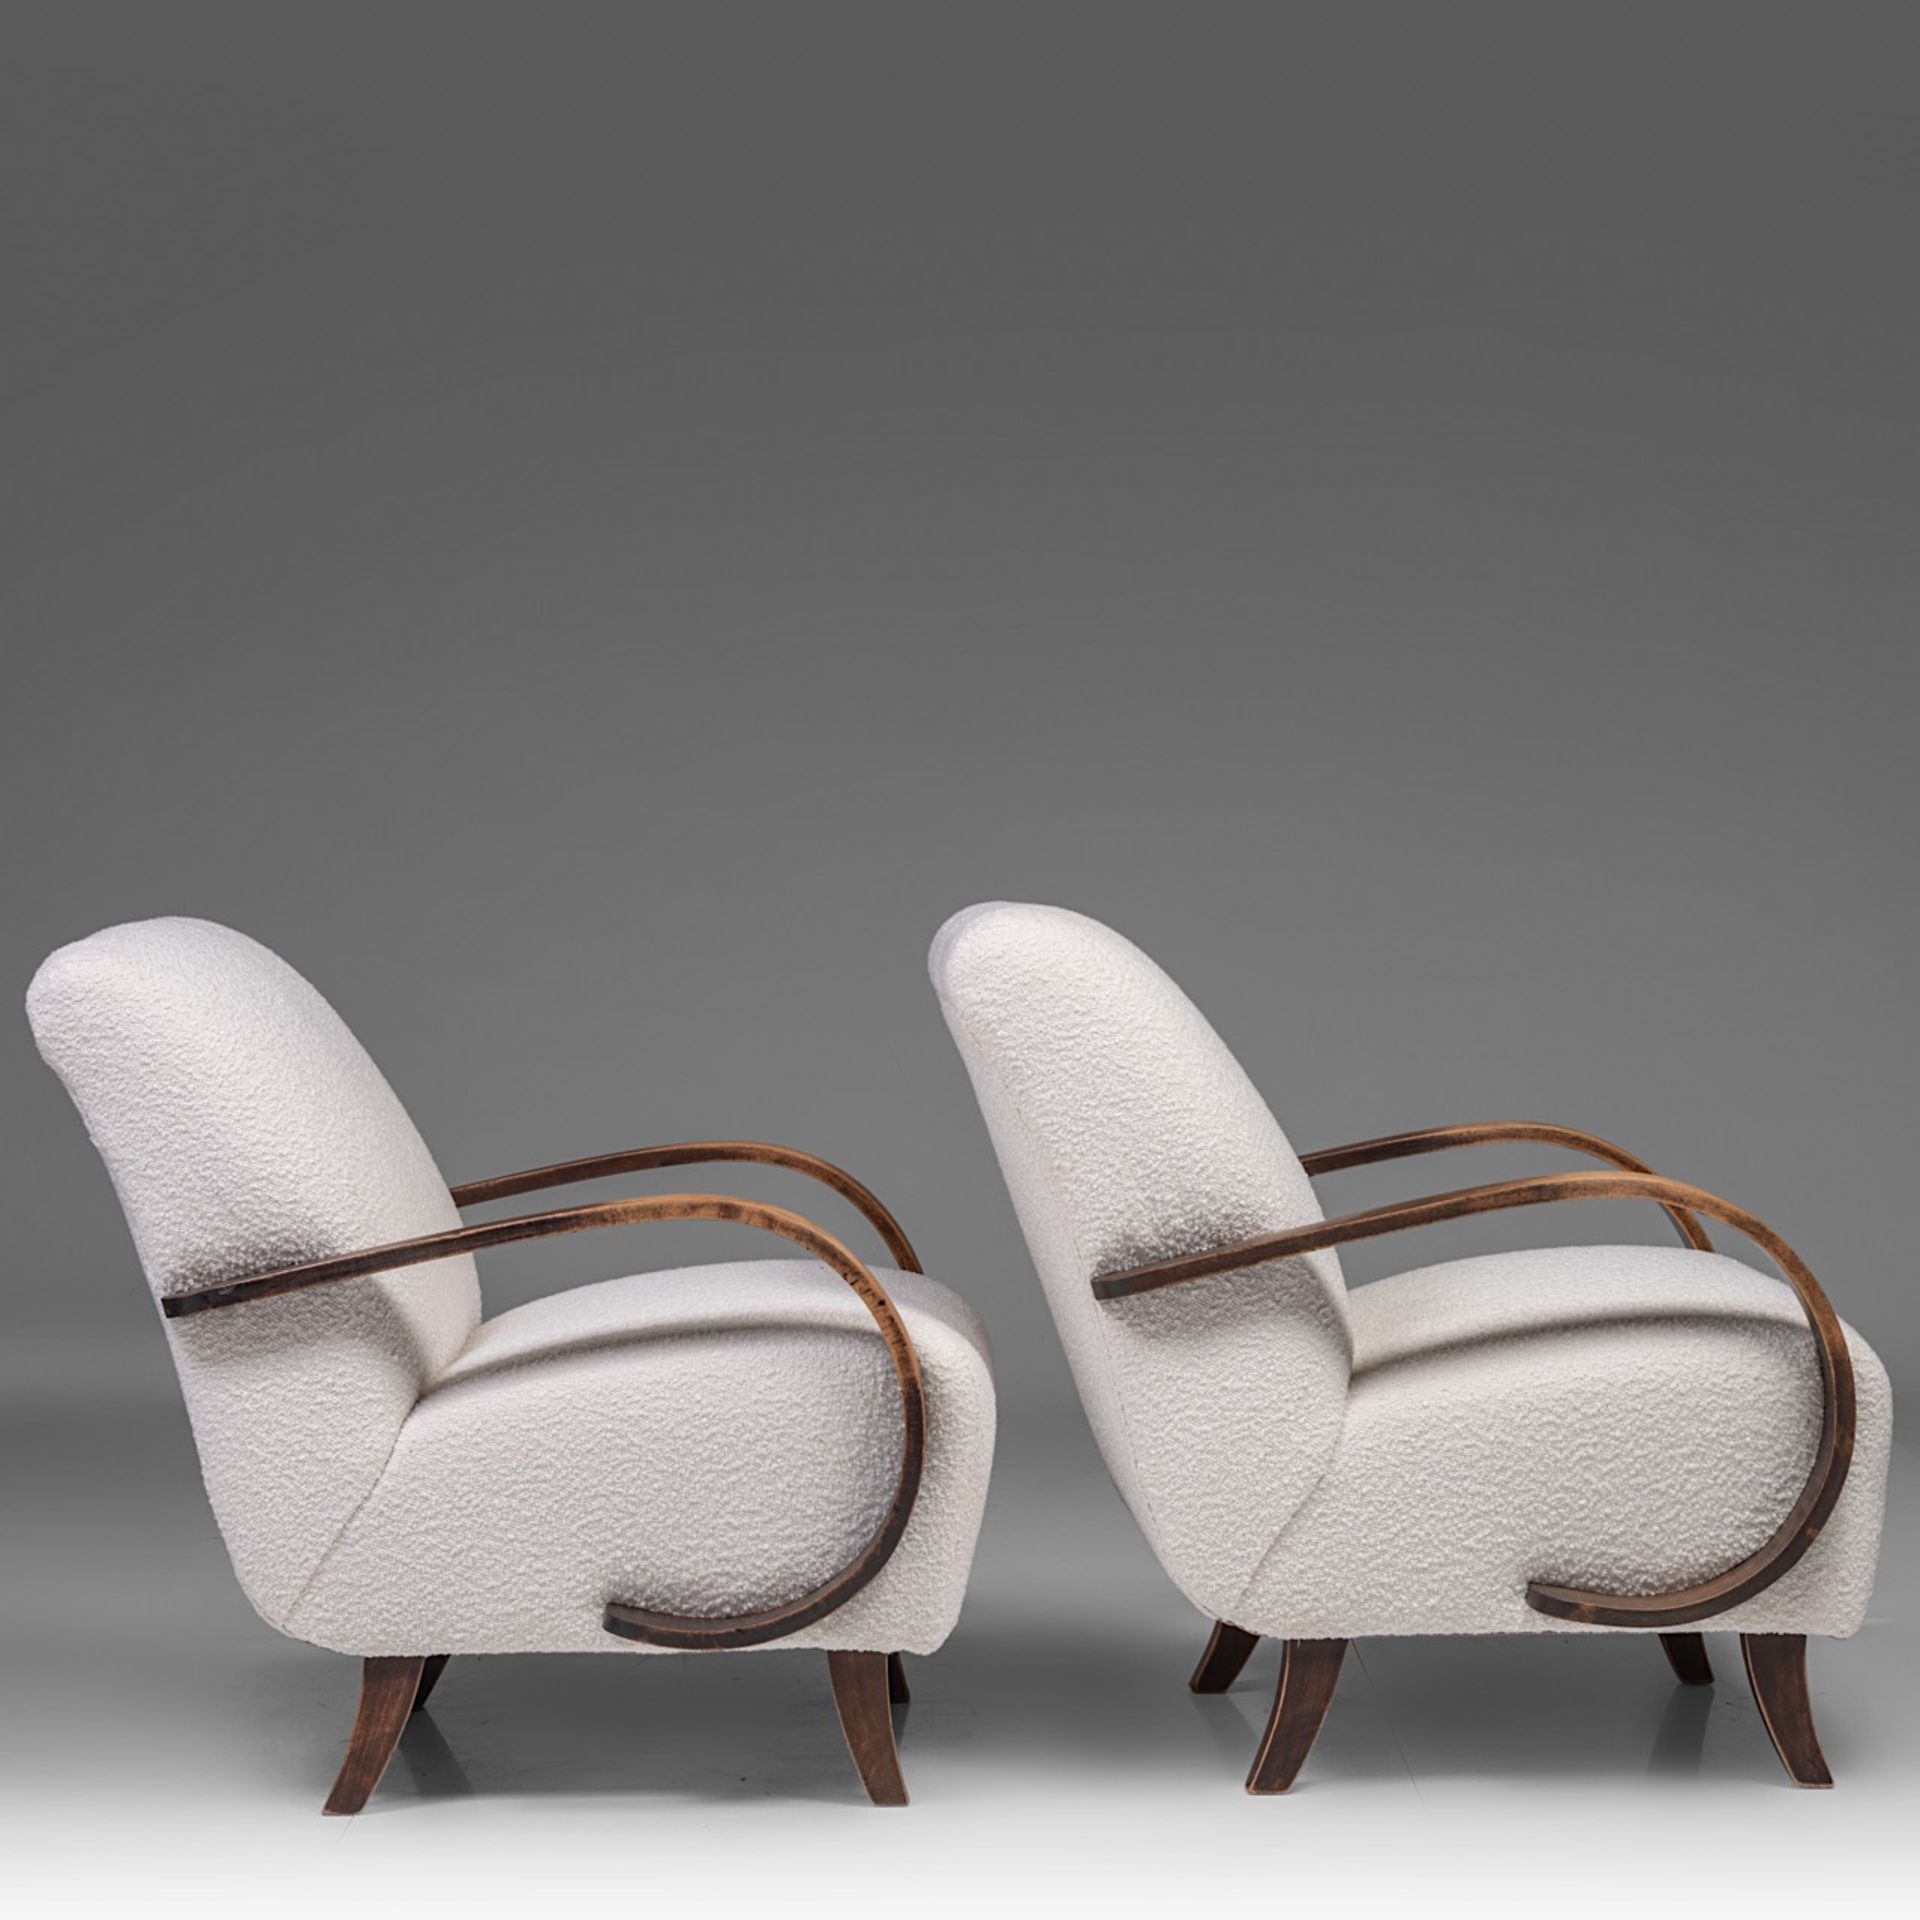 A pair of Mid-century Armchairs by Jindrich Halabala, 1950s 83 x 68 x 87 cm. (32.6 x 26.7 x 34 1/4 i - Image 6 of 13